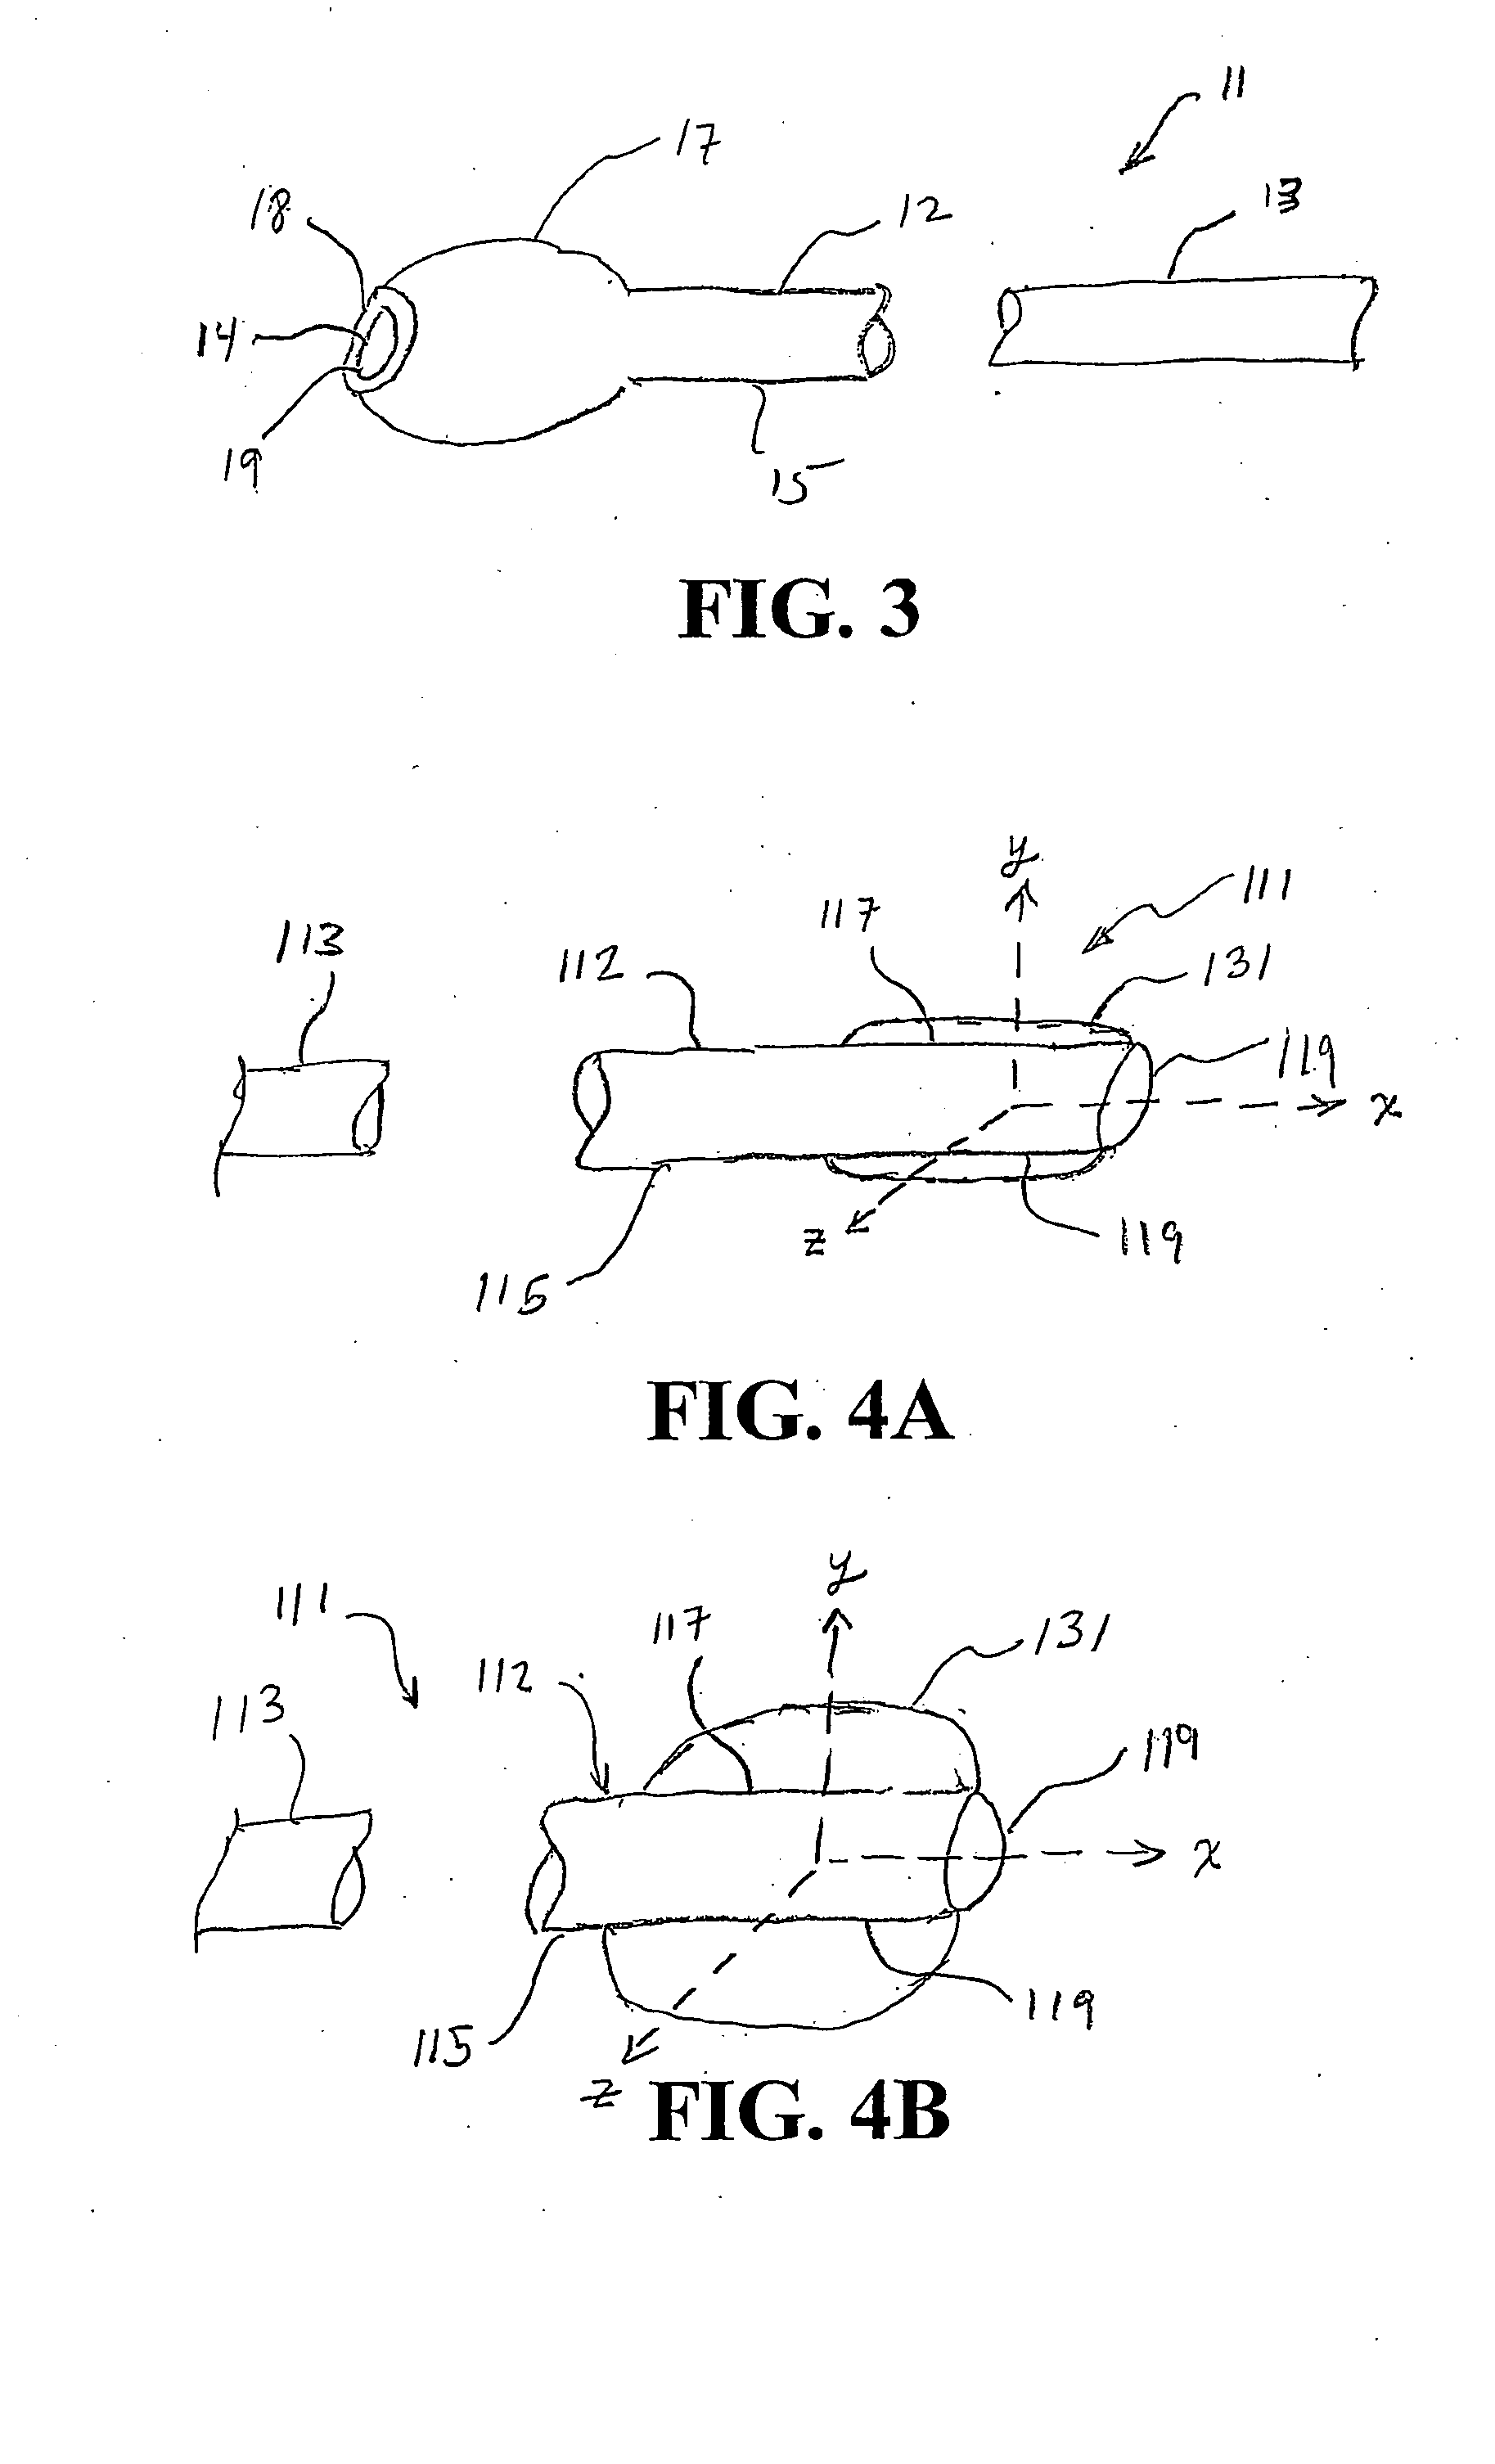 Vascular Catheter Device and Related Methods of Using the Same